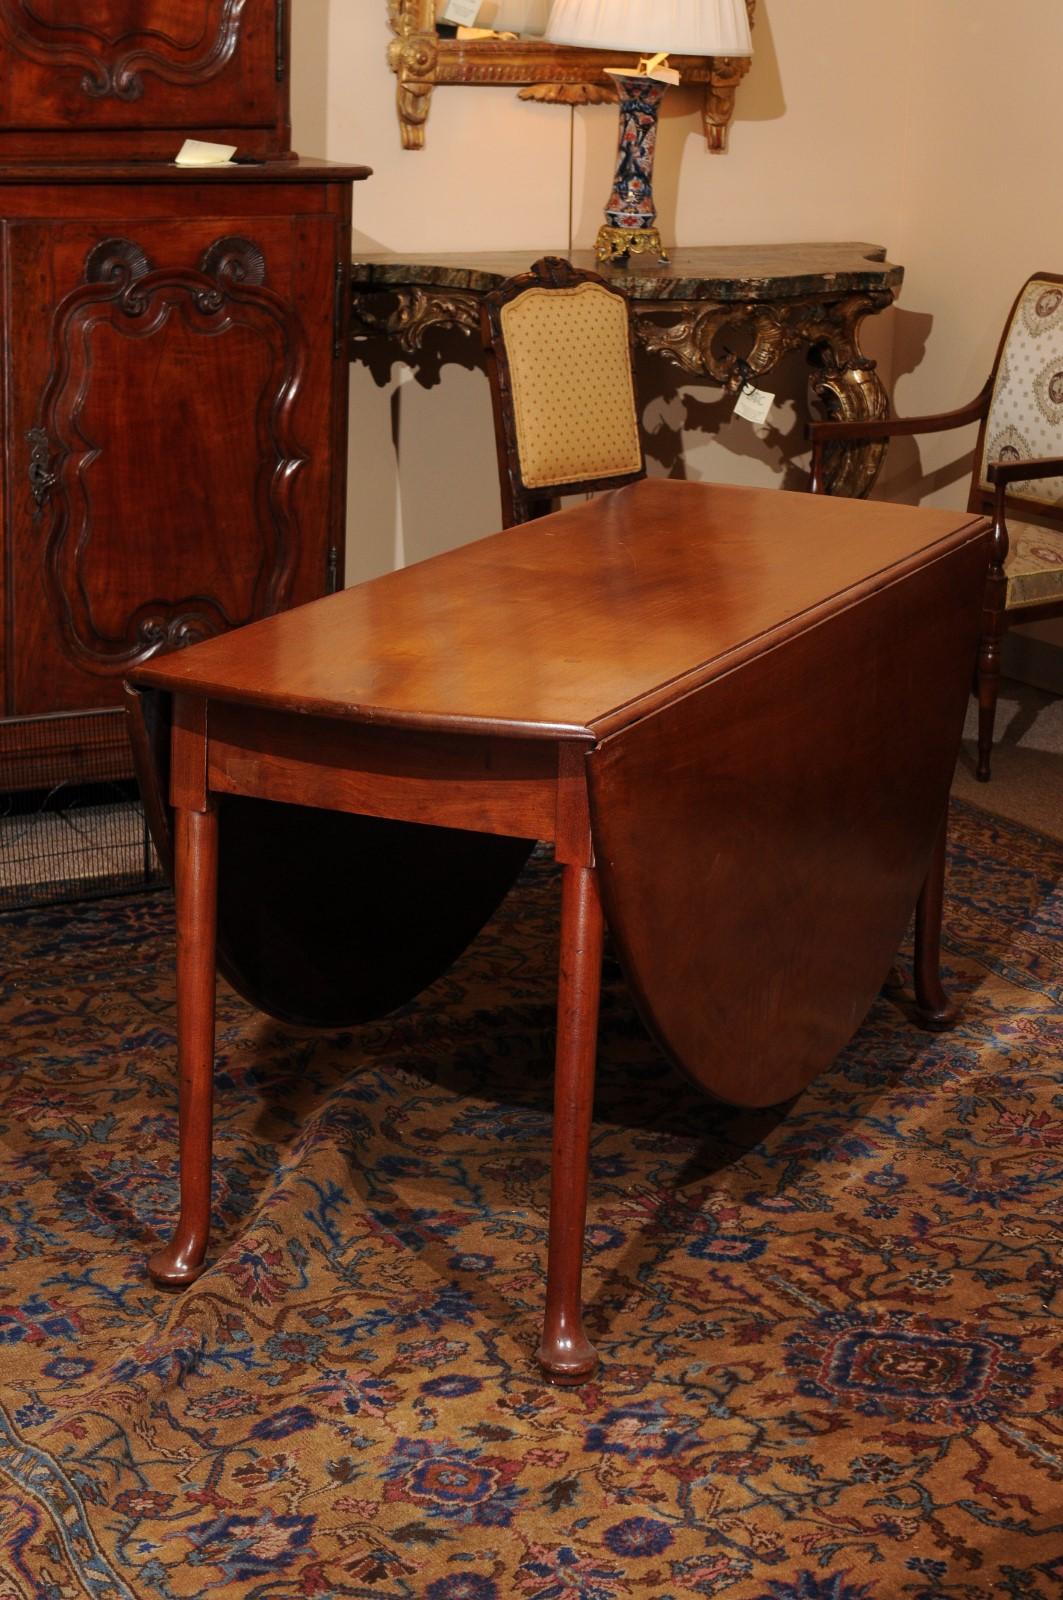  Mid-18th C English George II Mahogany Drop Leaf Oval Dining Table with Pad Feet (Table de salle à manger ovale à feuilles tombantes et pieds pad) en vente 4